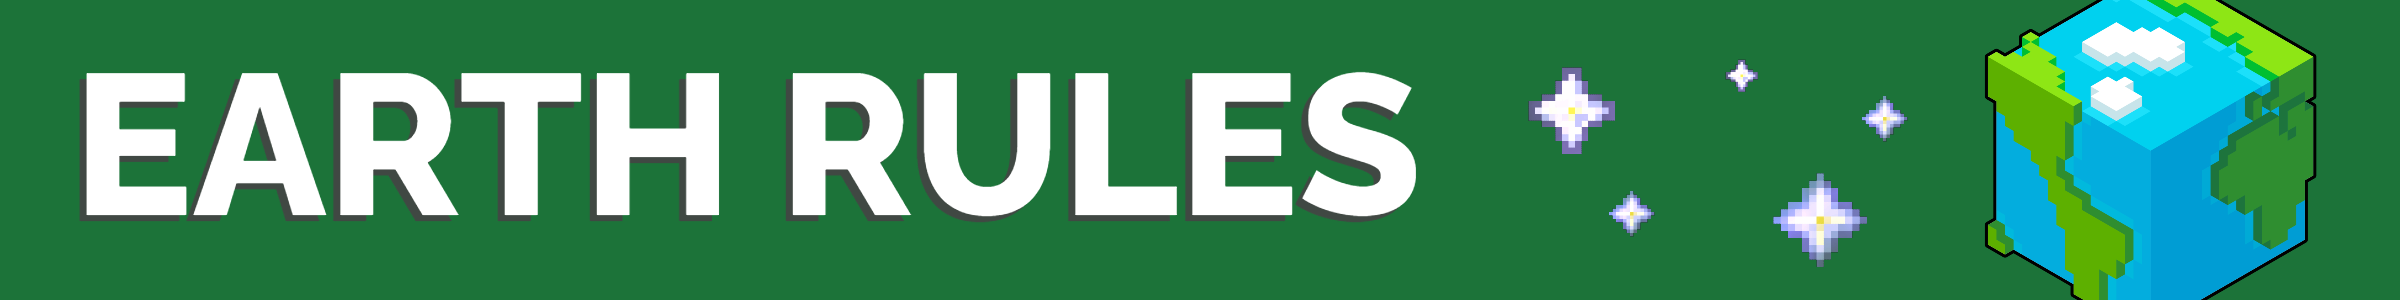 rulesbanner.png